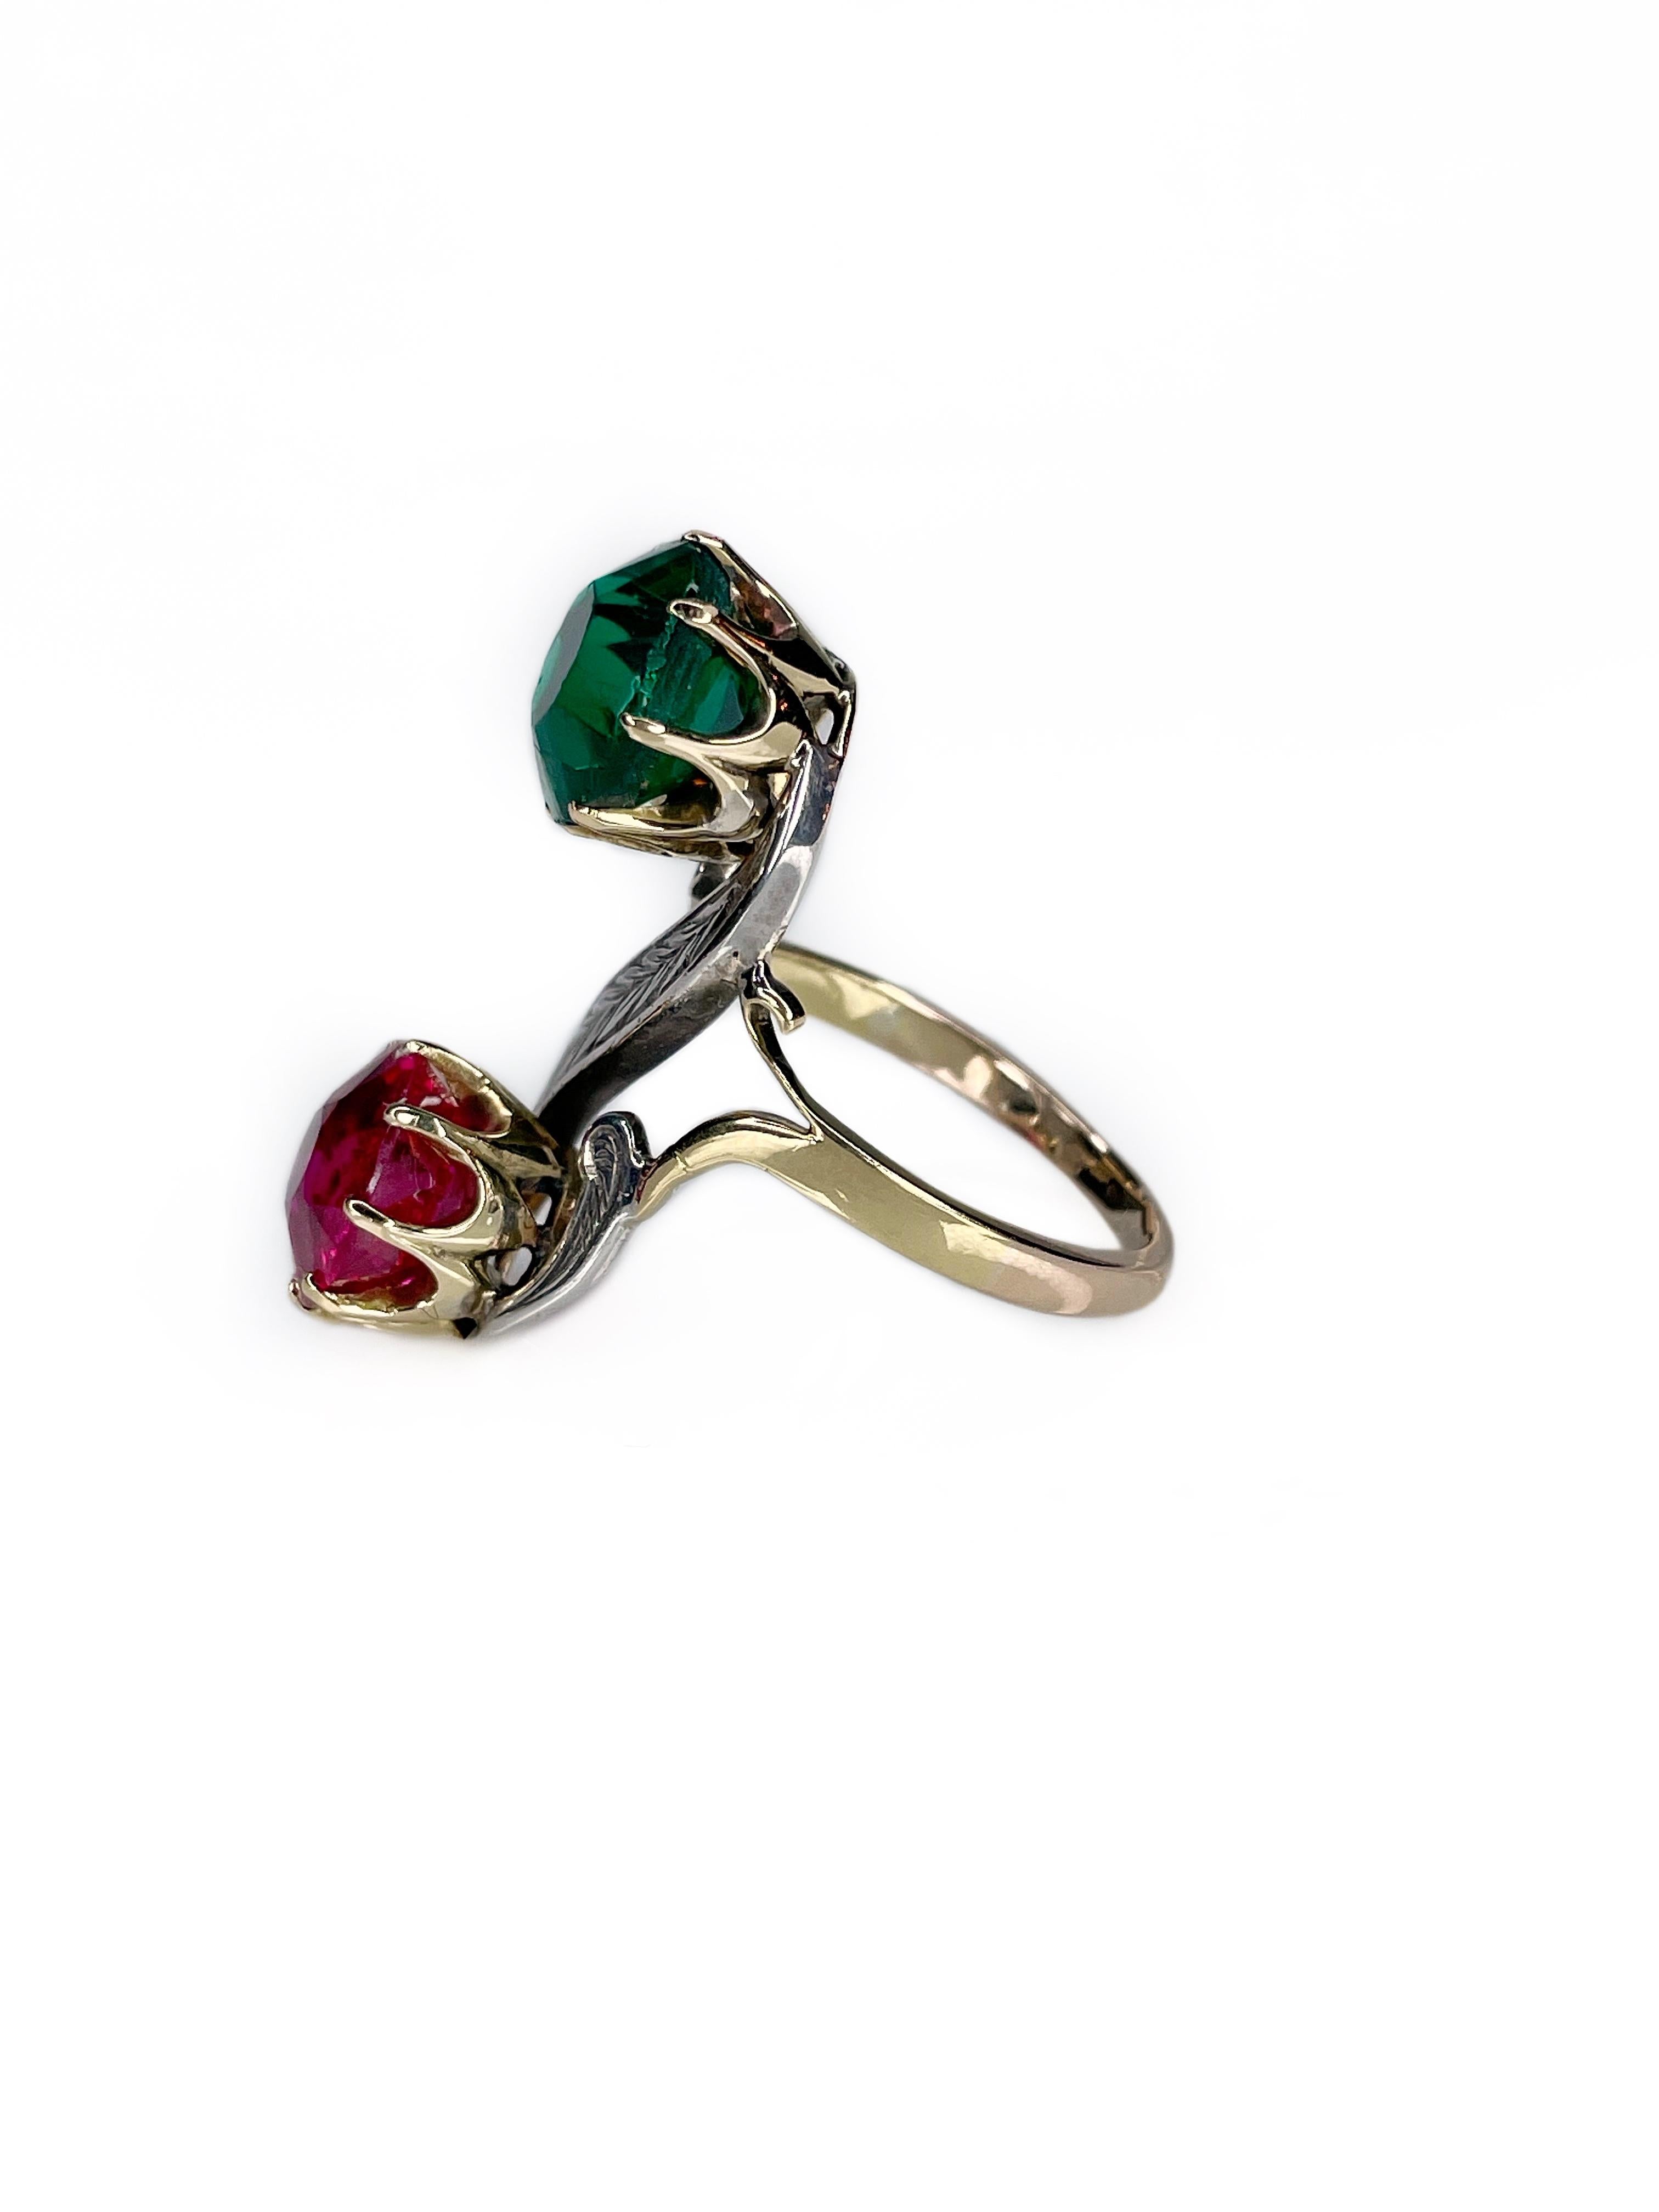 It is an interesting Art Nouveau style vintage S-shaped ring crafted in 14K yellow gold and 830 hallmark silver. It features round synthetic ruby and synthetic emerald.

Weight: 7.81g
Size: 17 (US7)
Head length: 2.9cm

IMPORTANT: please ask about